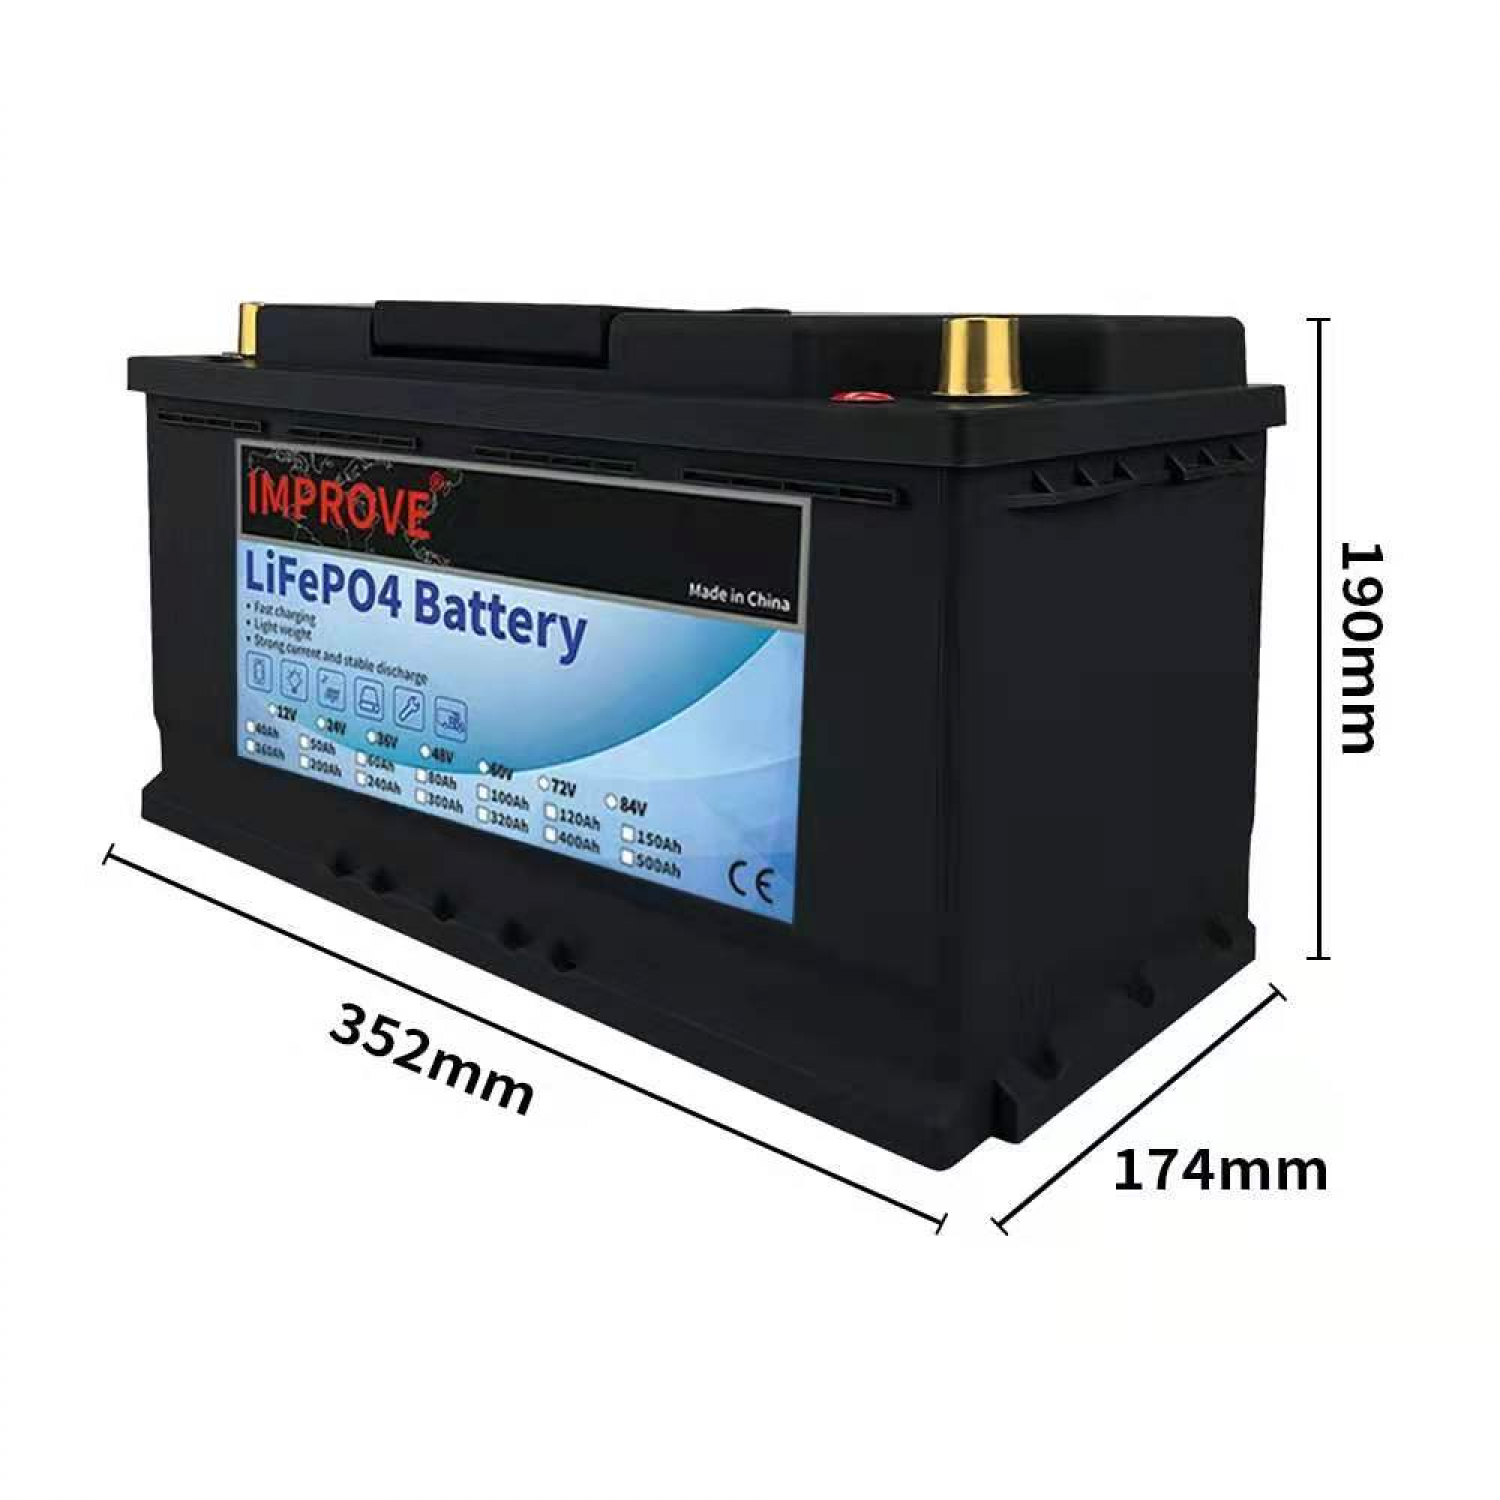 How to Choose the Best Lifepo4 Battery 12v 100ah?